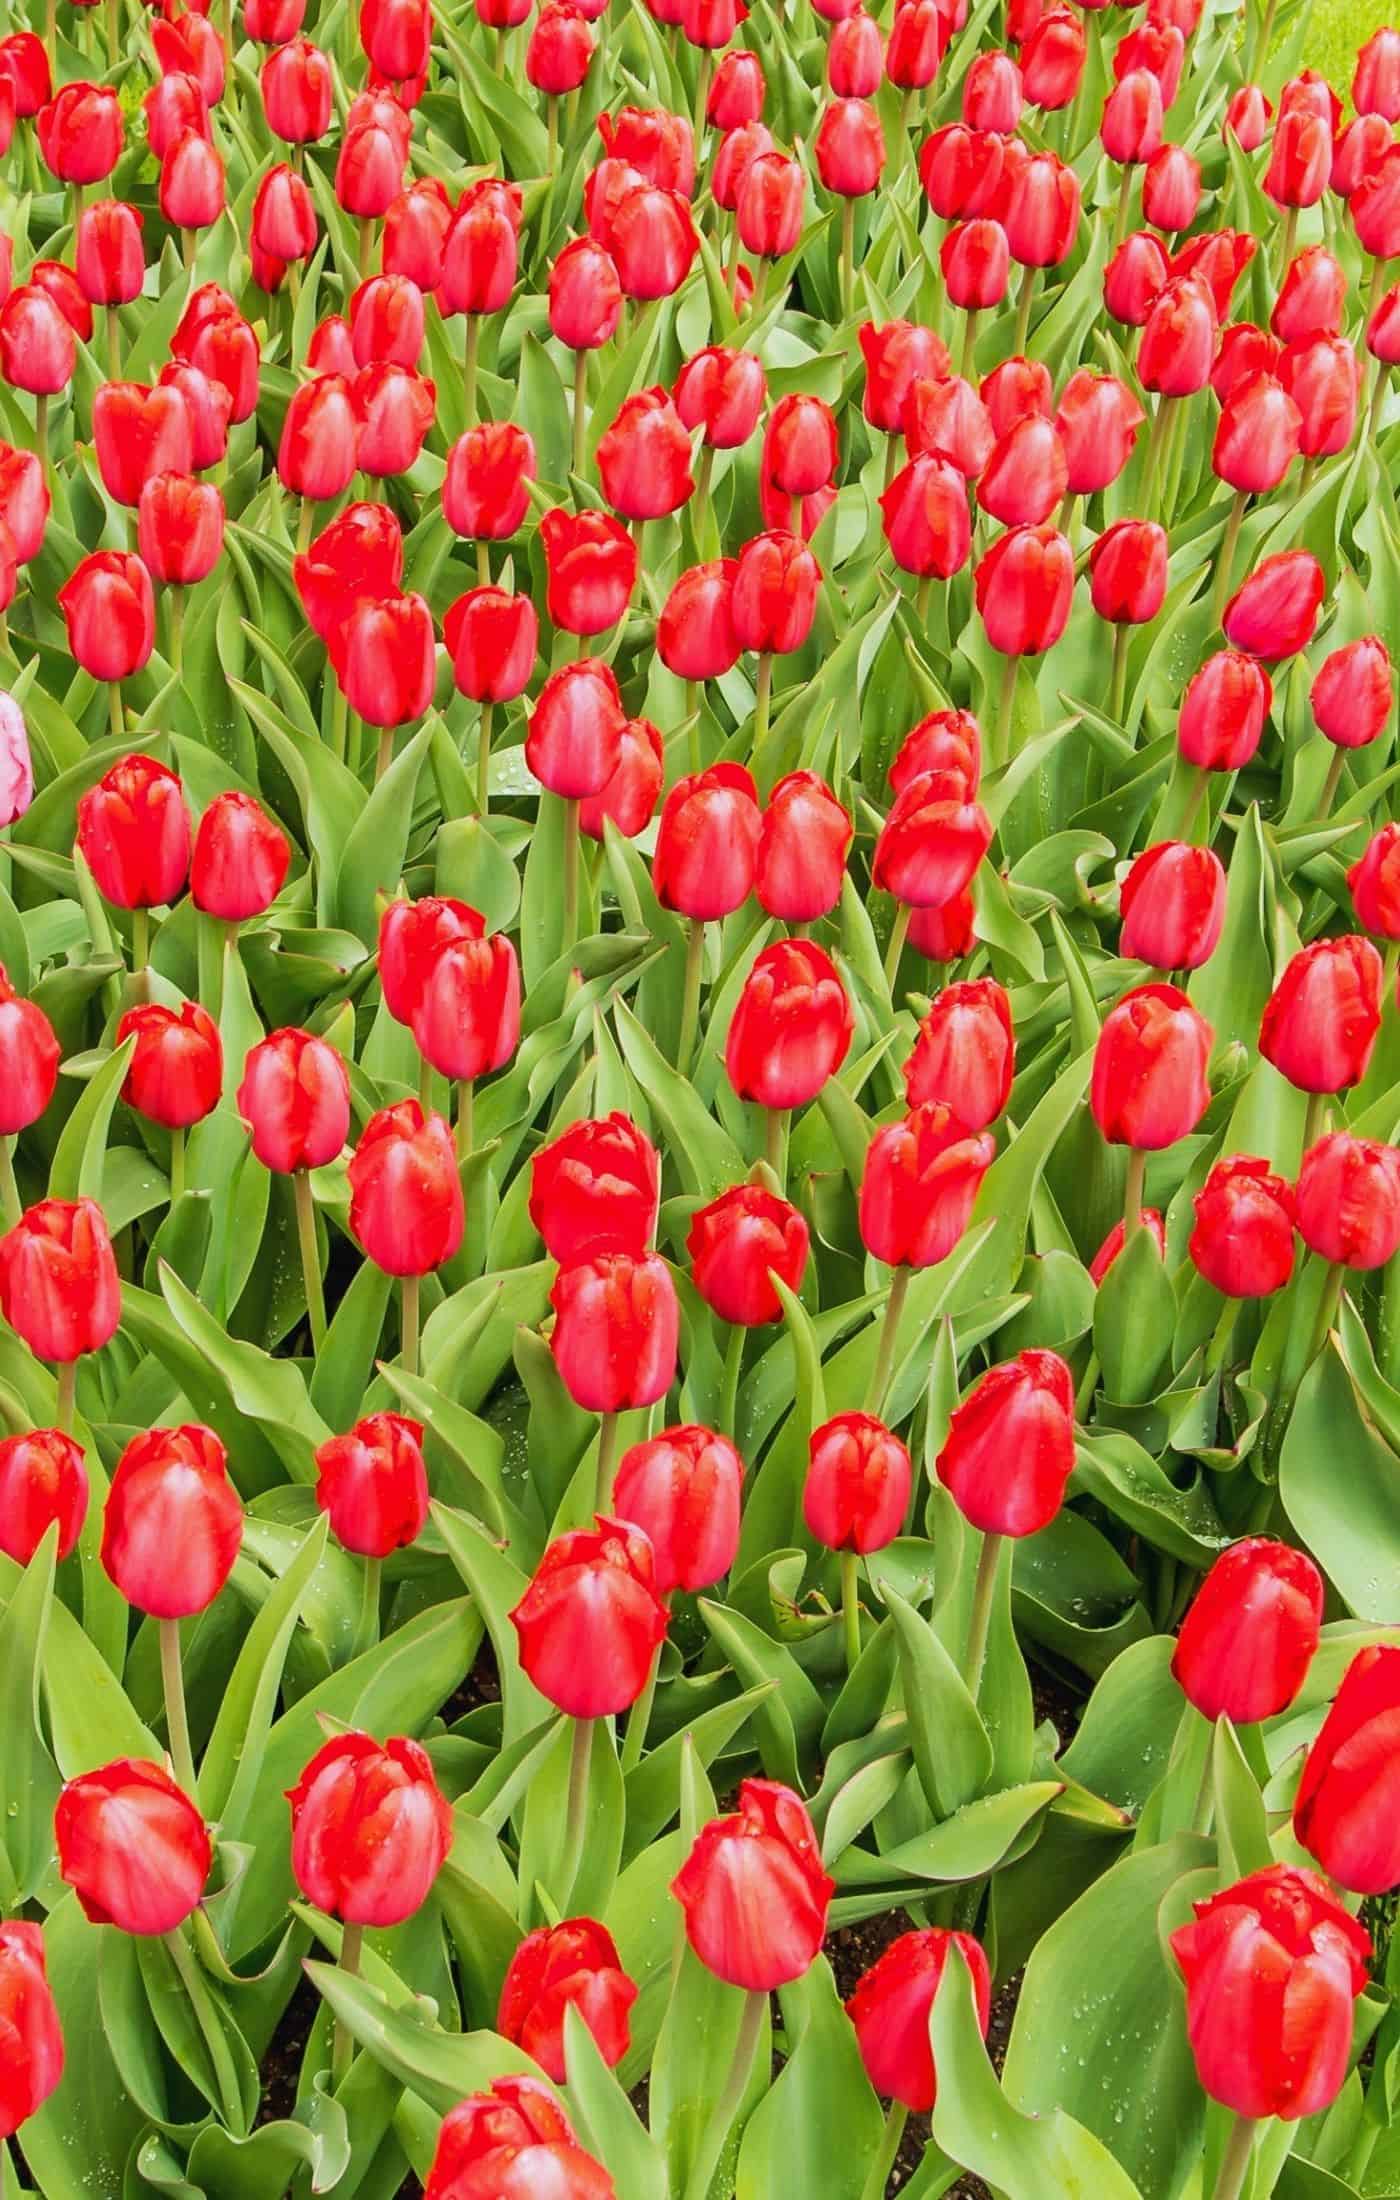 Red impression tulips